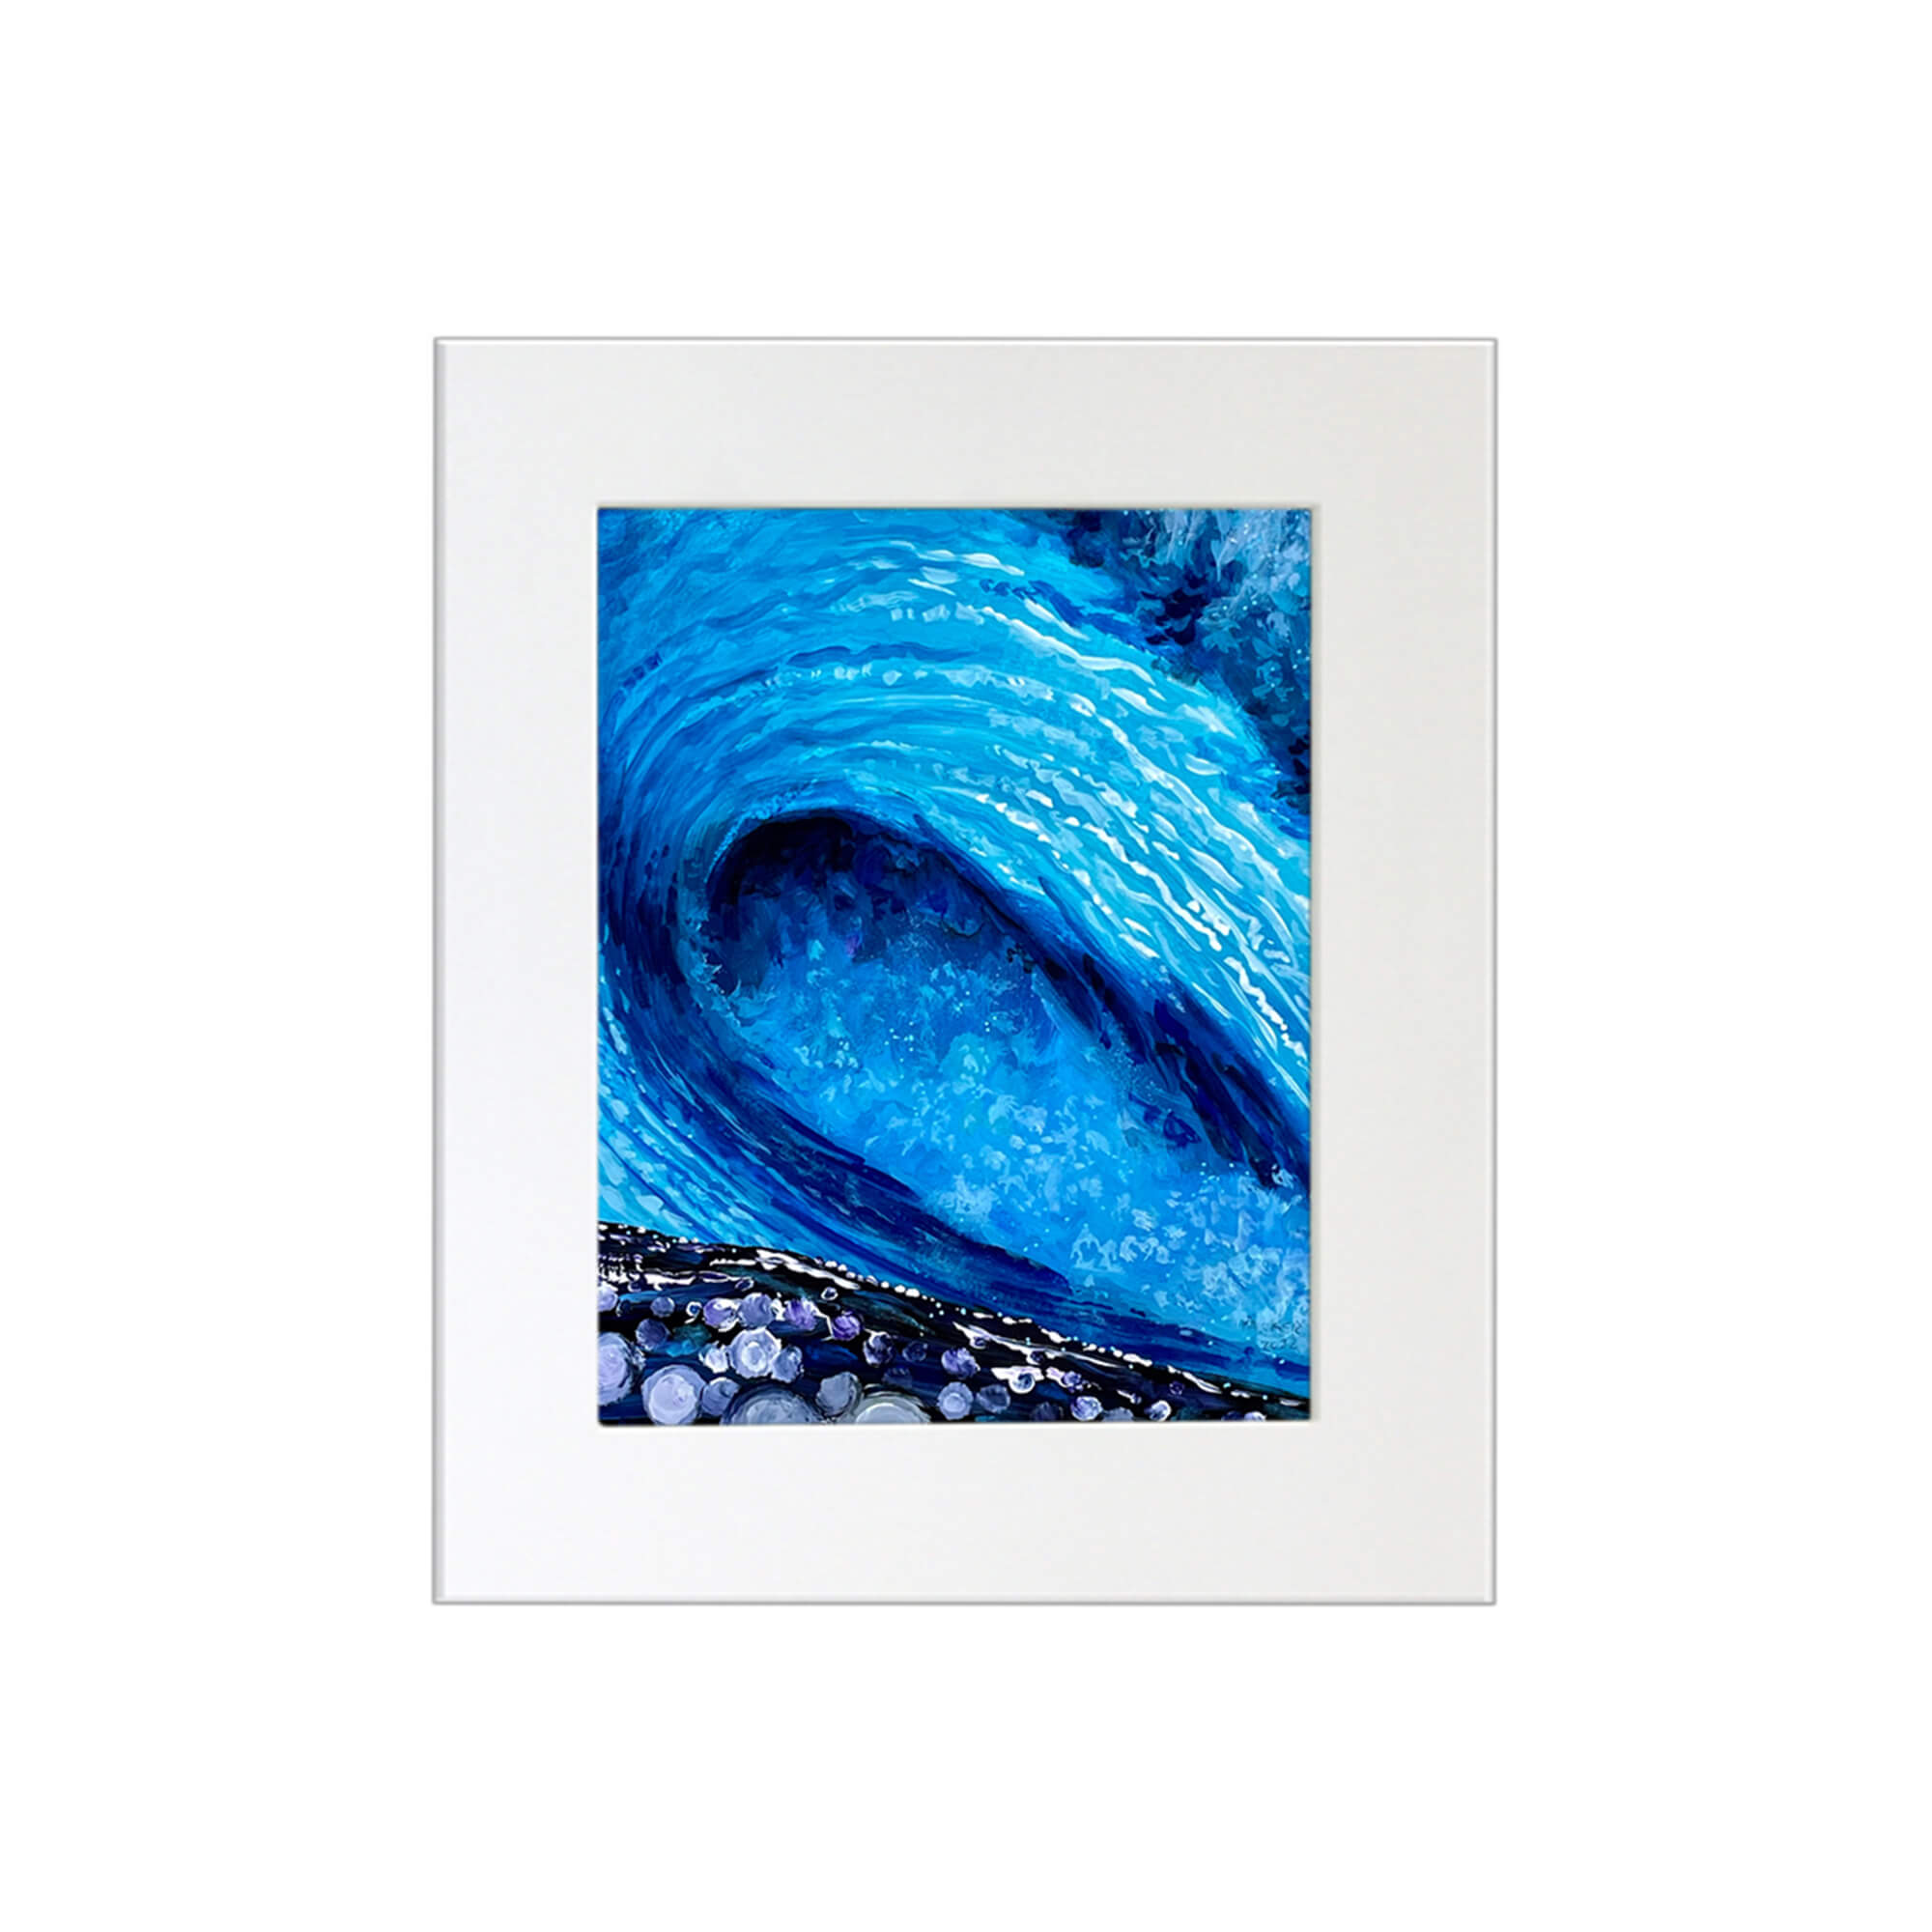 An original painting featuring a large crashing blue wave by Maui artist Patrick Parker